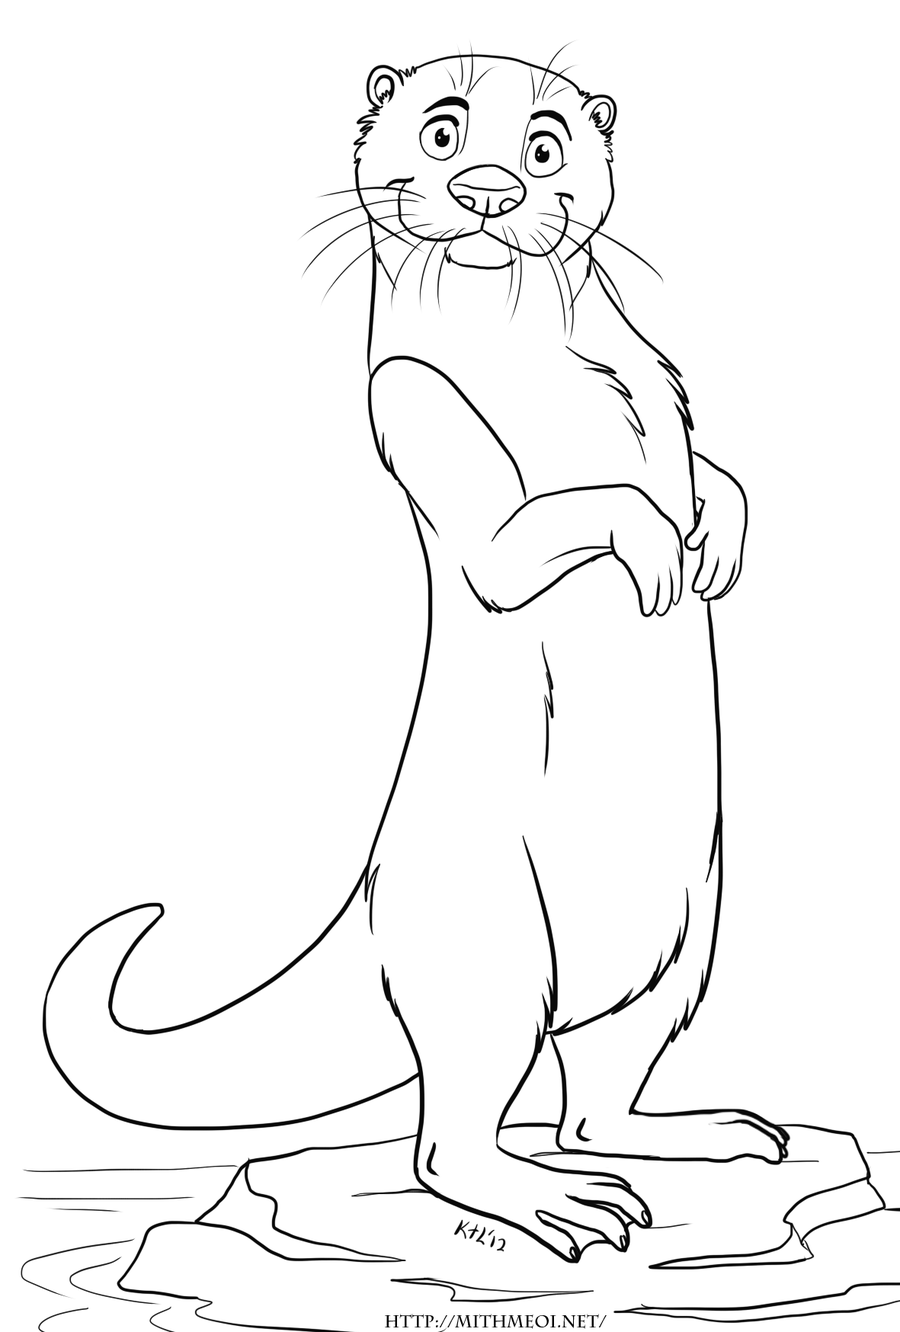 Cute Sea Otter Coloring Page